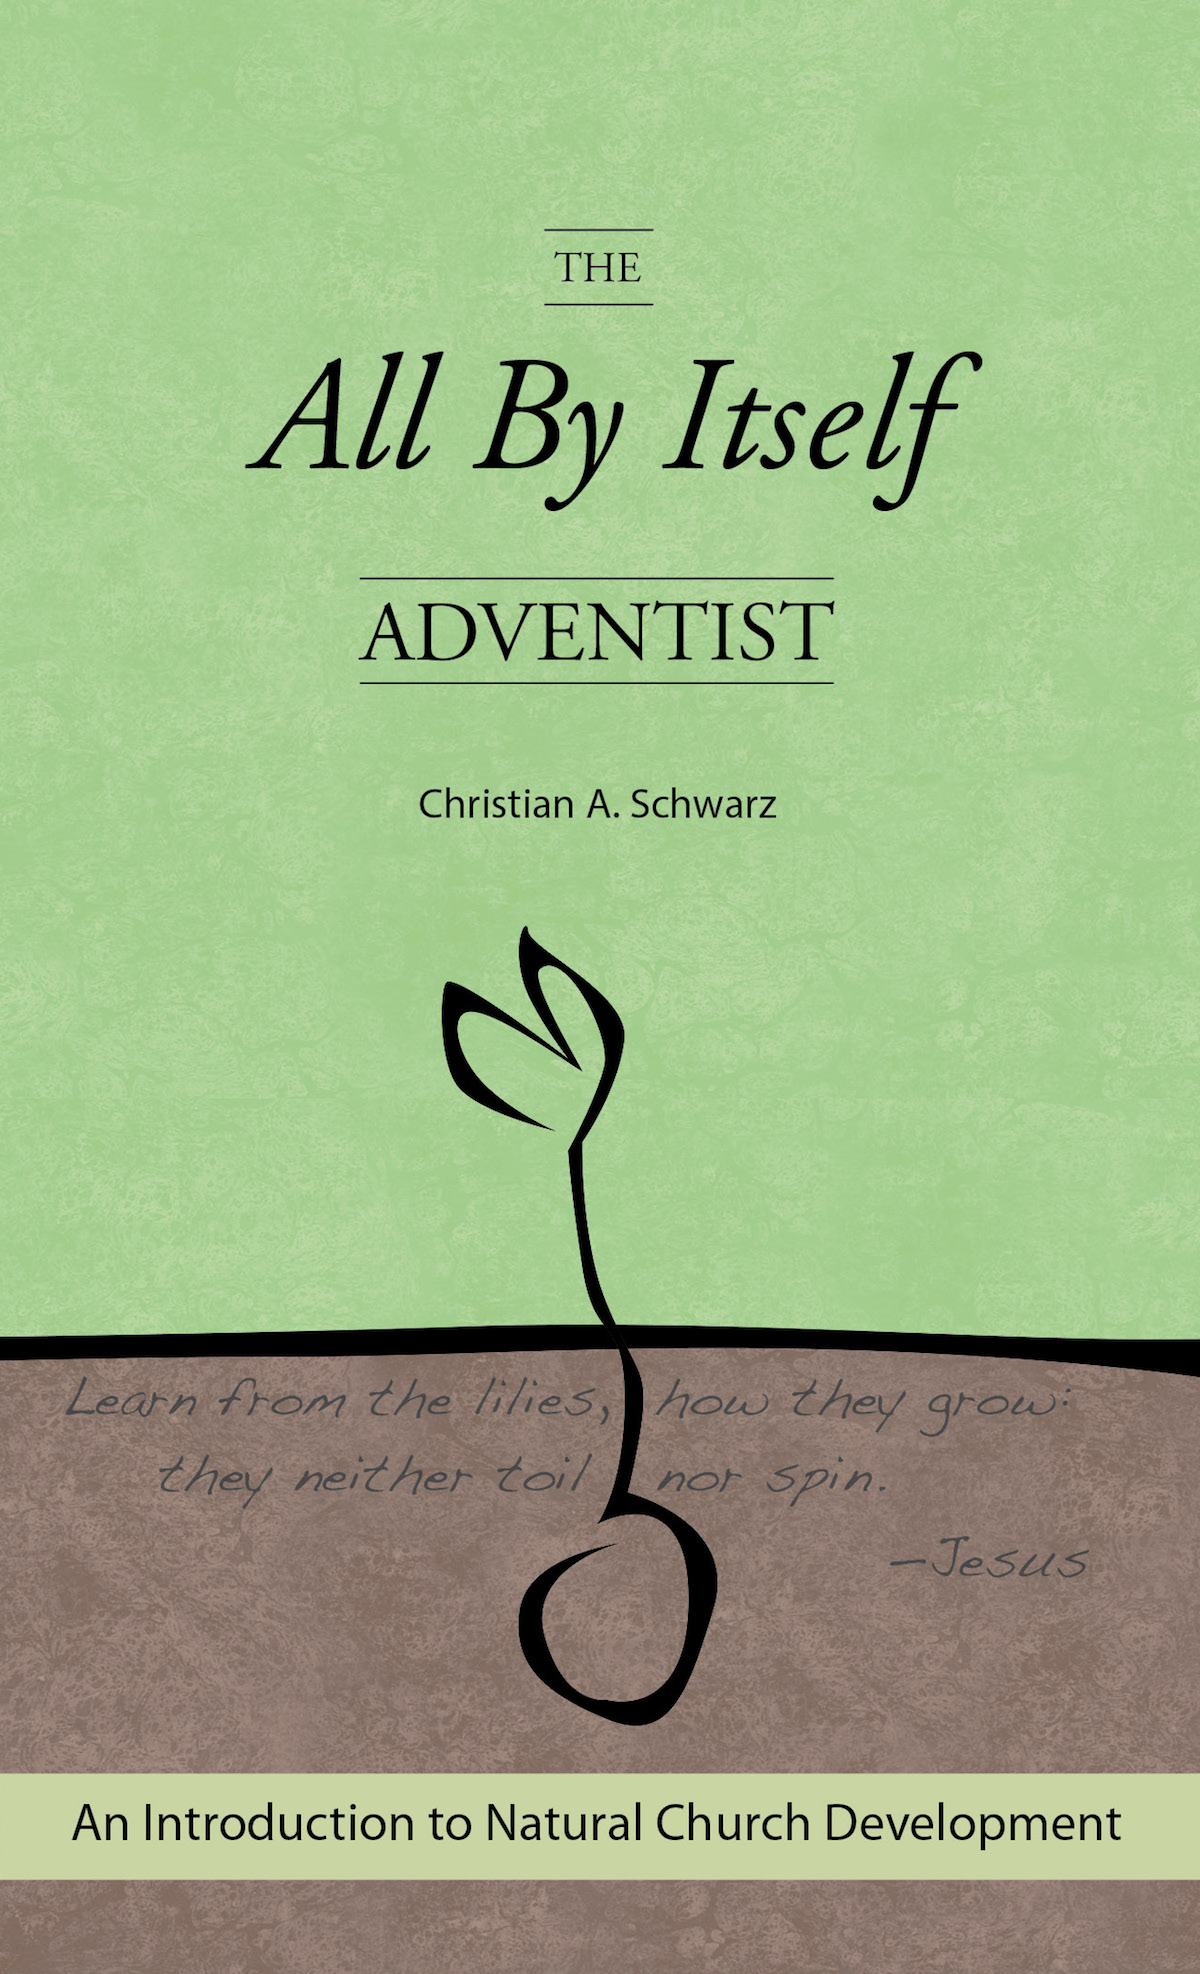 The All By Itself Adventist